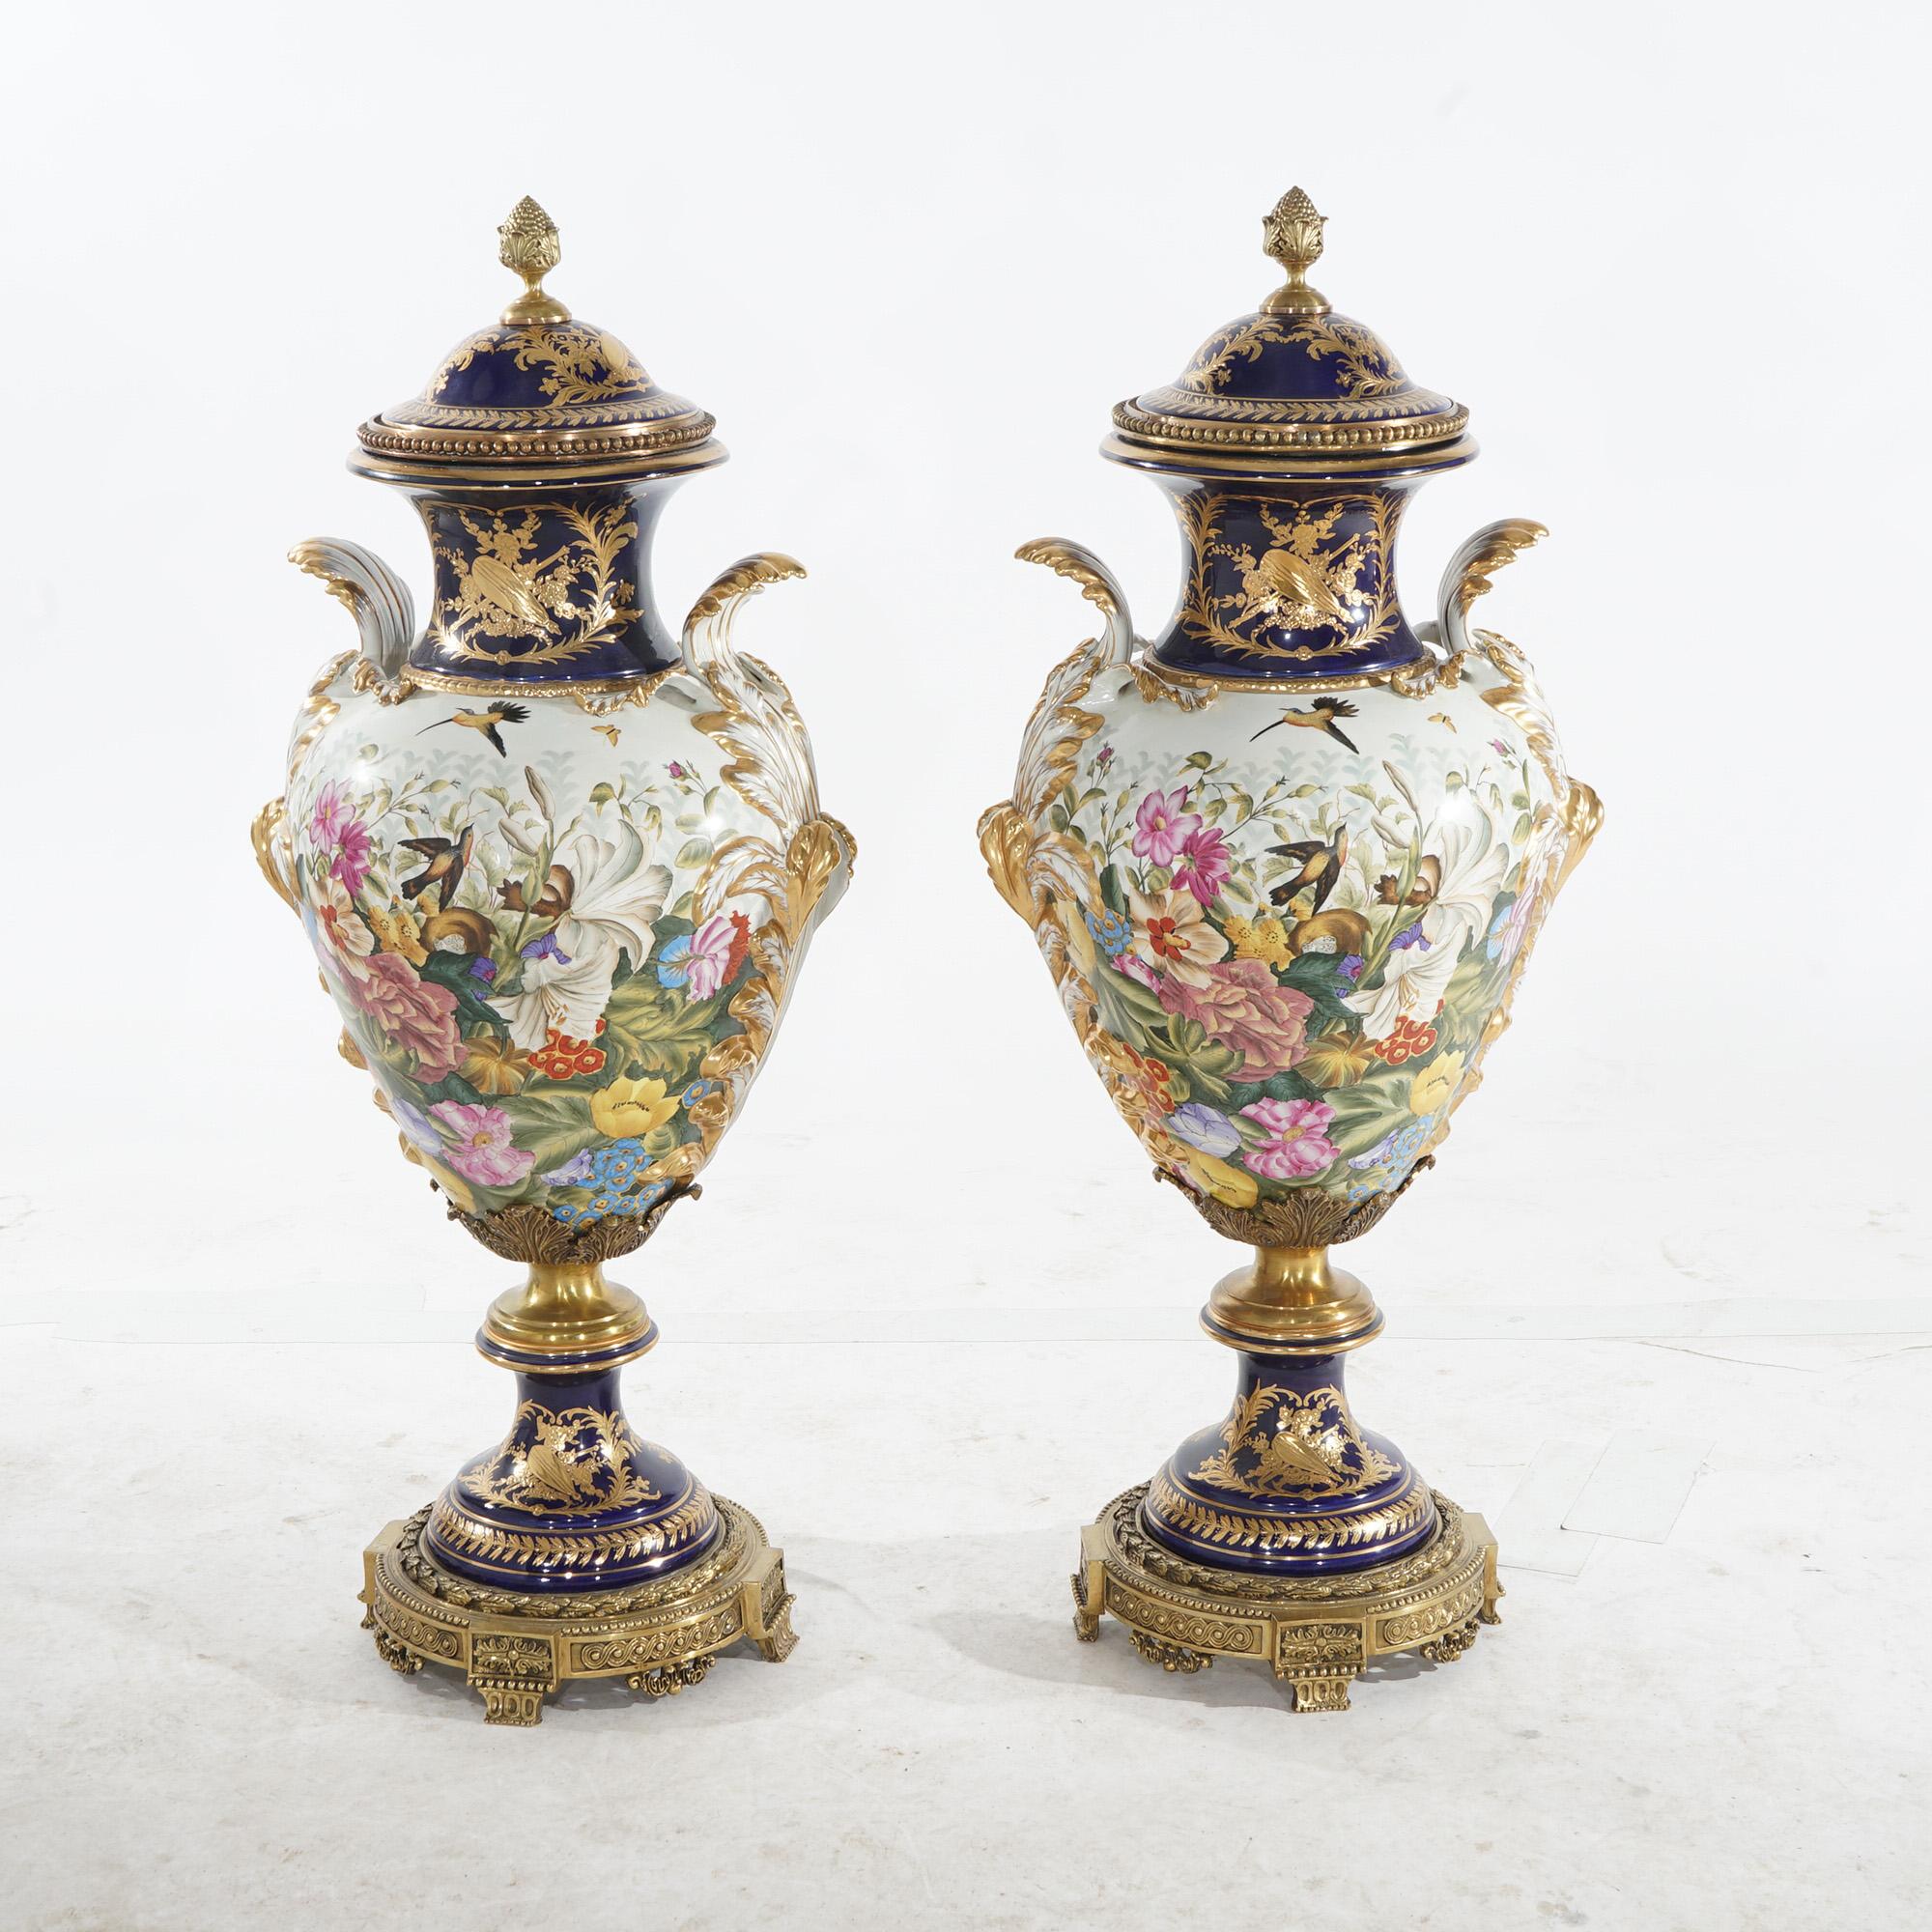 Pair of Monumental French Sevres Porcelain with Hand Painted Garden Scene having Flowers and Birds as well as Cast Bronze Mounts, Signed on Bases, 20th Century

Measure - 37.75